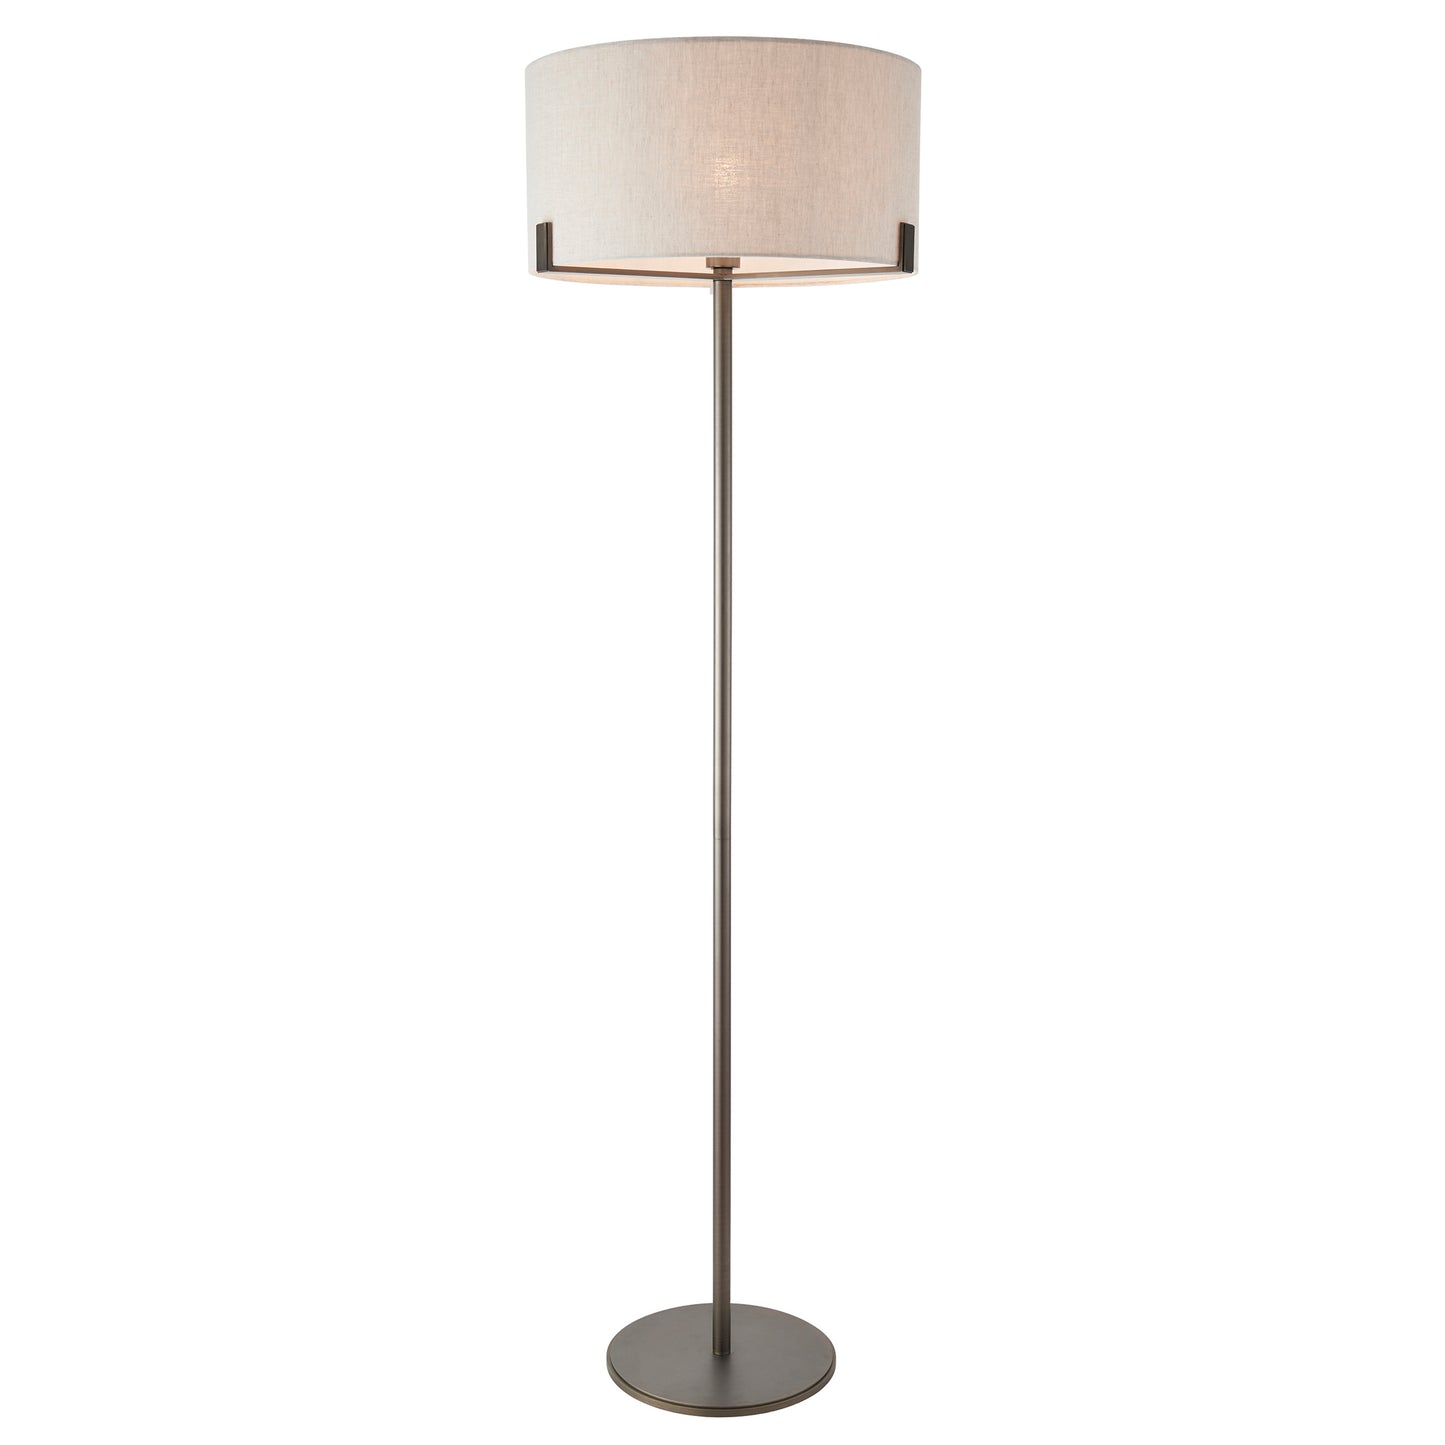 A Hayfield Floor Lamp in Bronze/Natural with a white shade, perfect for interior decor and home furniture enthusiasts from Kikiathome.co.uk.